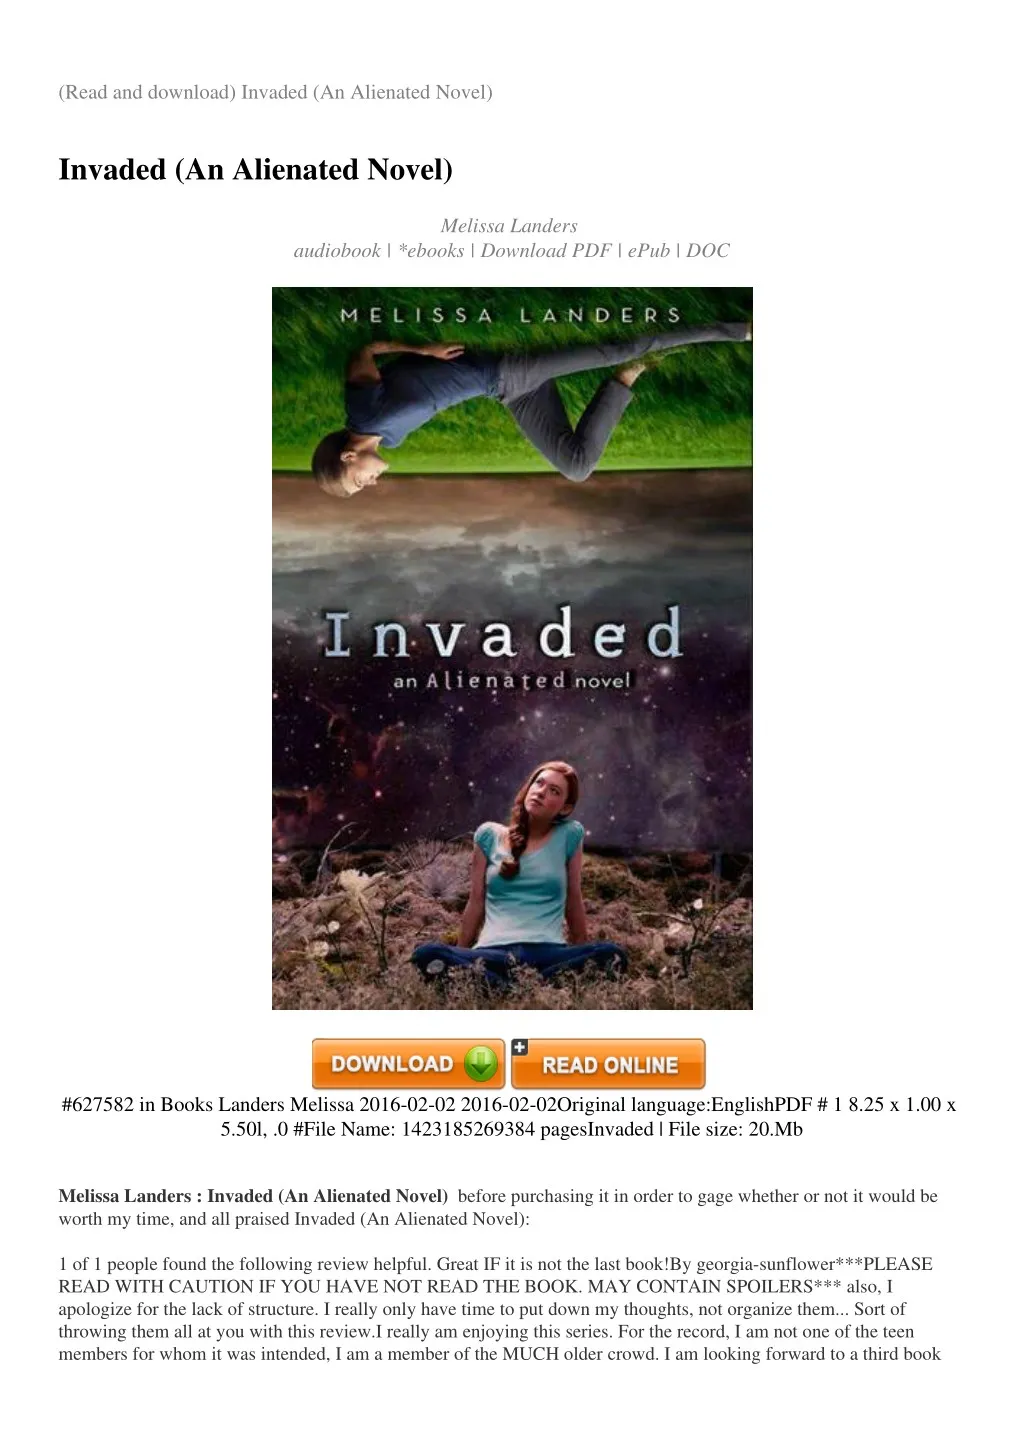 read and download invaded an alienated novel